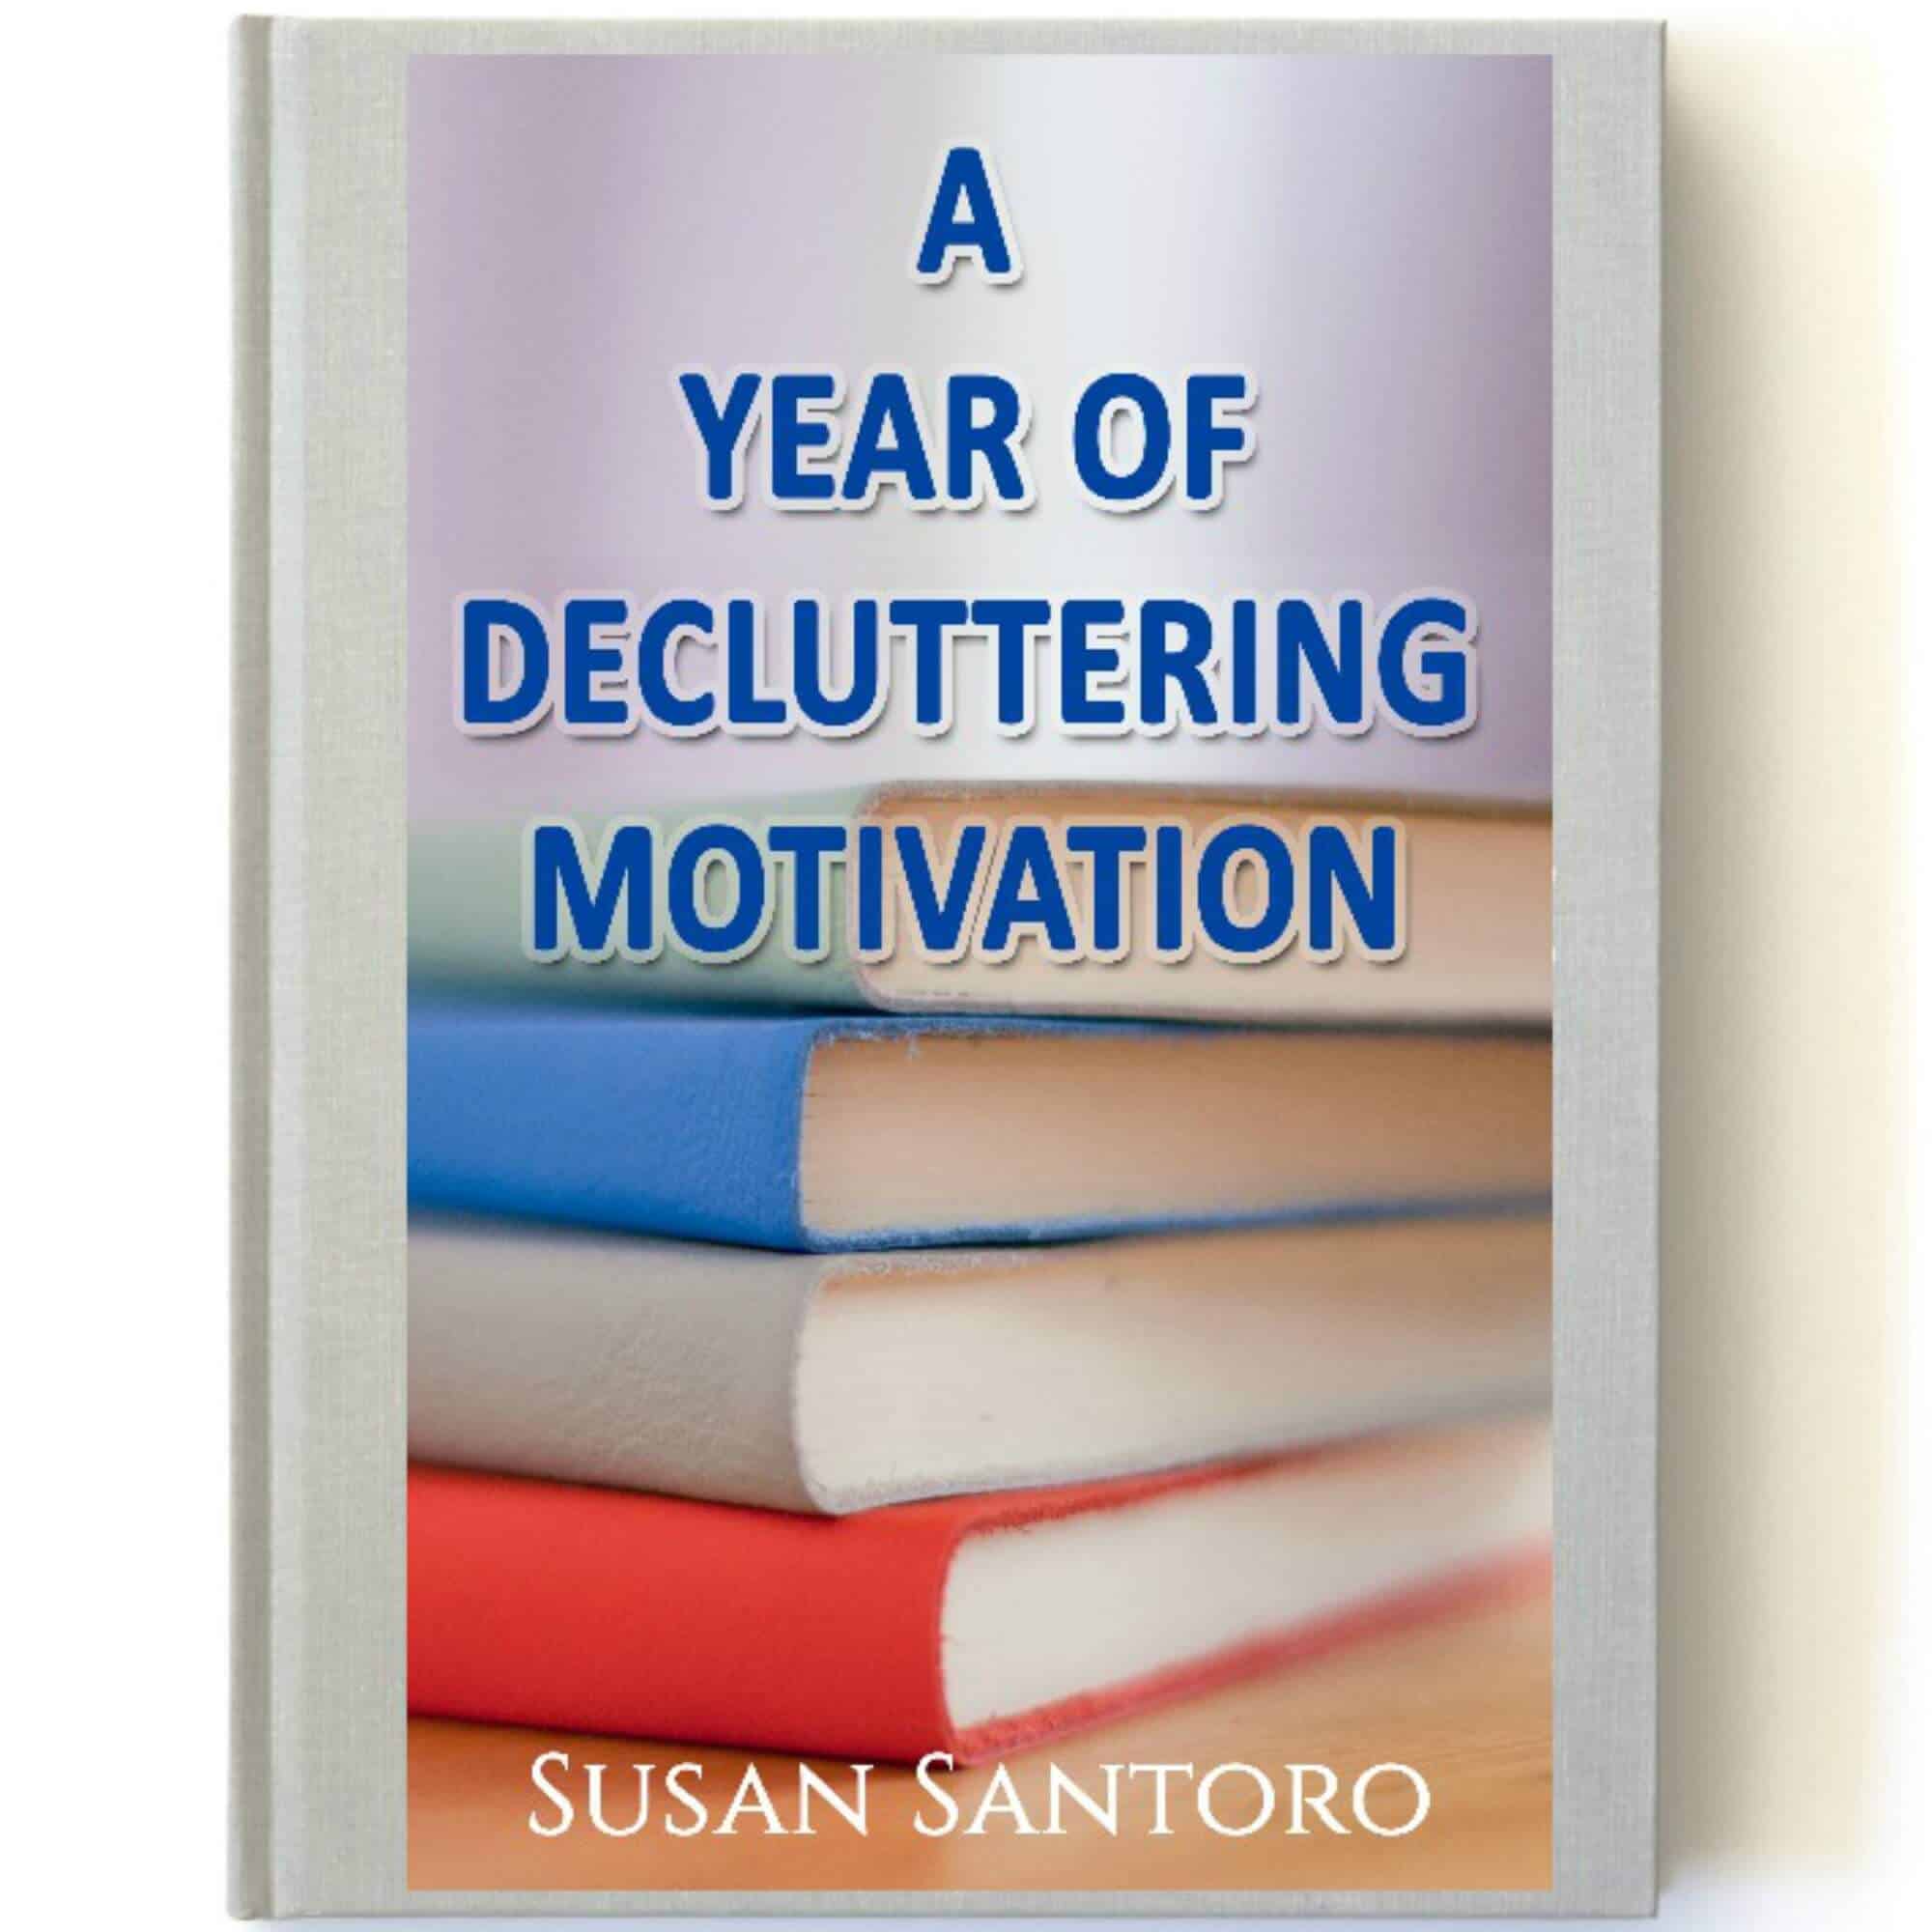 cover of book with image of stack of books with bright covers with text overlay reading A Year Of Decluttering Motivation